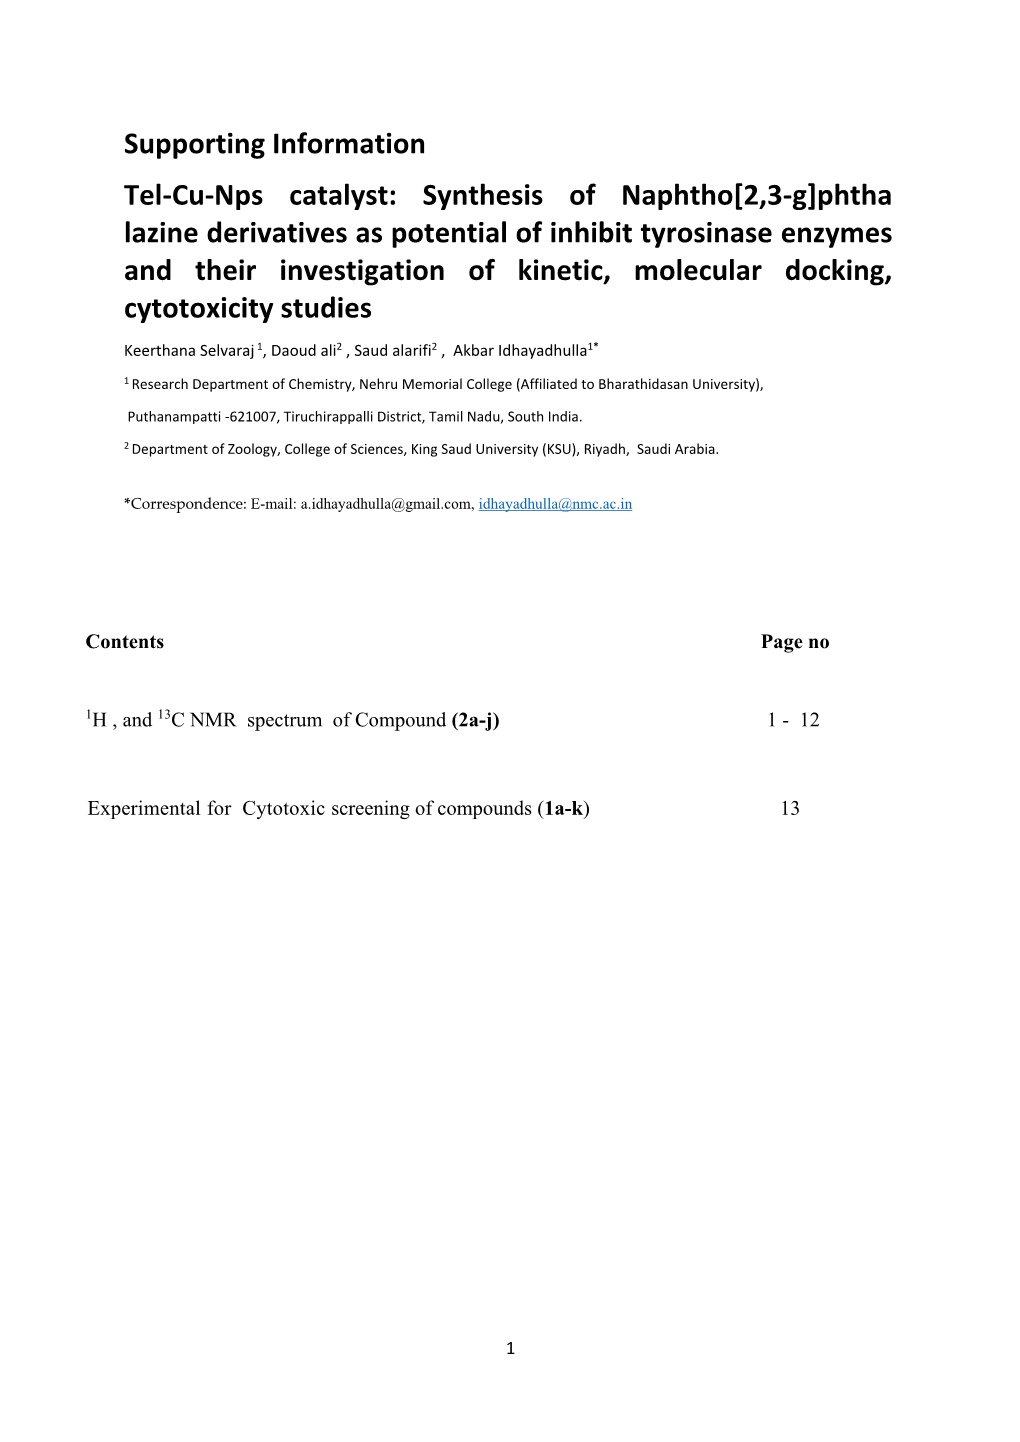 Phtha Lazine Derivatives As Potential of Inhibit Tyrosinase Enzymes and Their Investigation of Kinetic, Molecular Docking, Cytotoxicity Studies